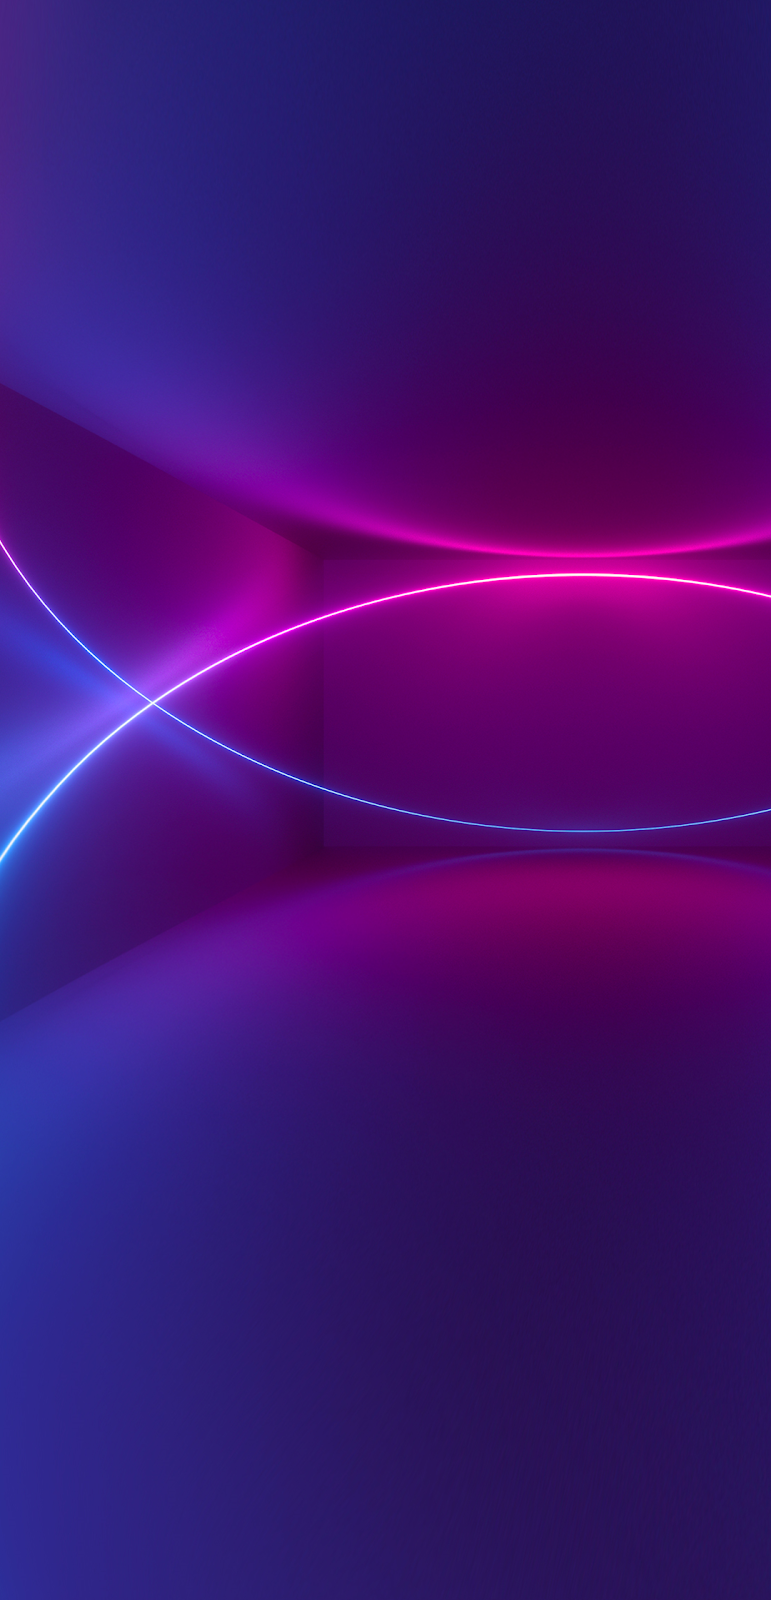 Neon light #wallpaper #iphone #android. Beautiful wallpaper background, Abstract wallpaper background, Background phone wallpaper